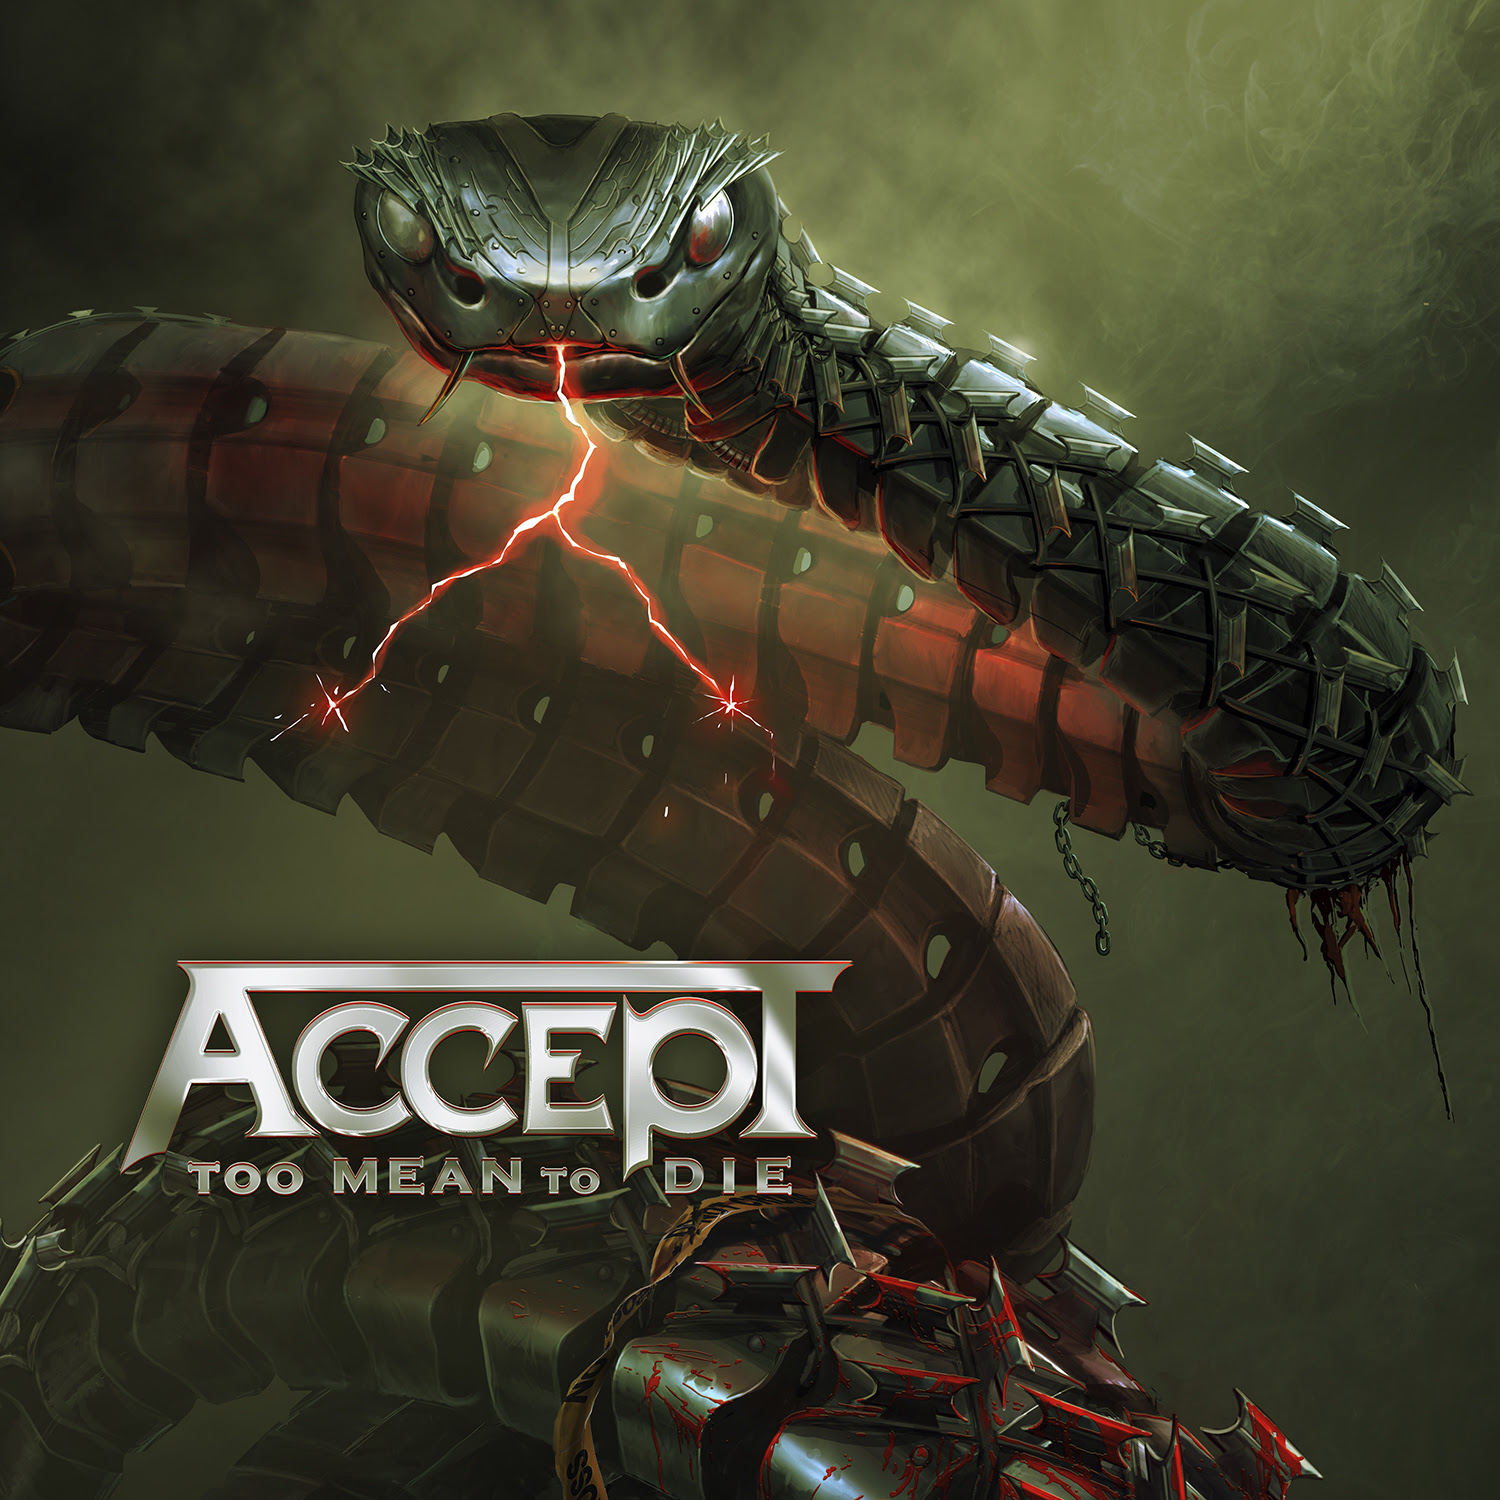 Accept - Too Mean To Die Album Cover Artwork